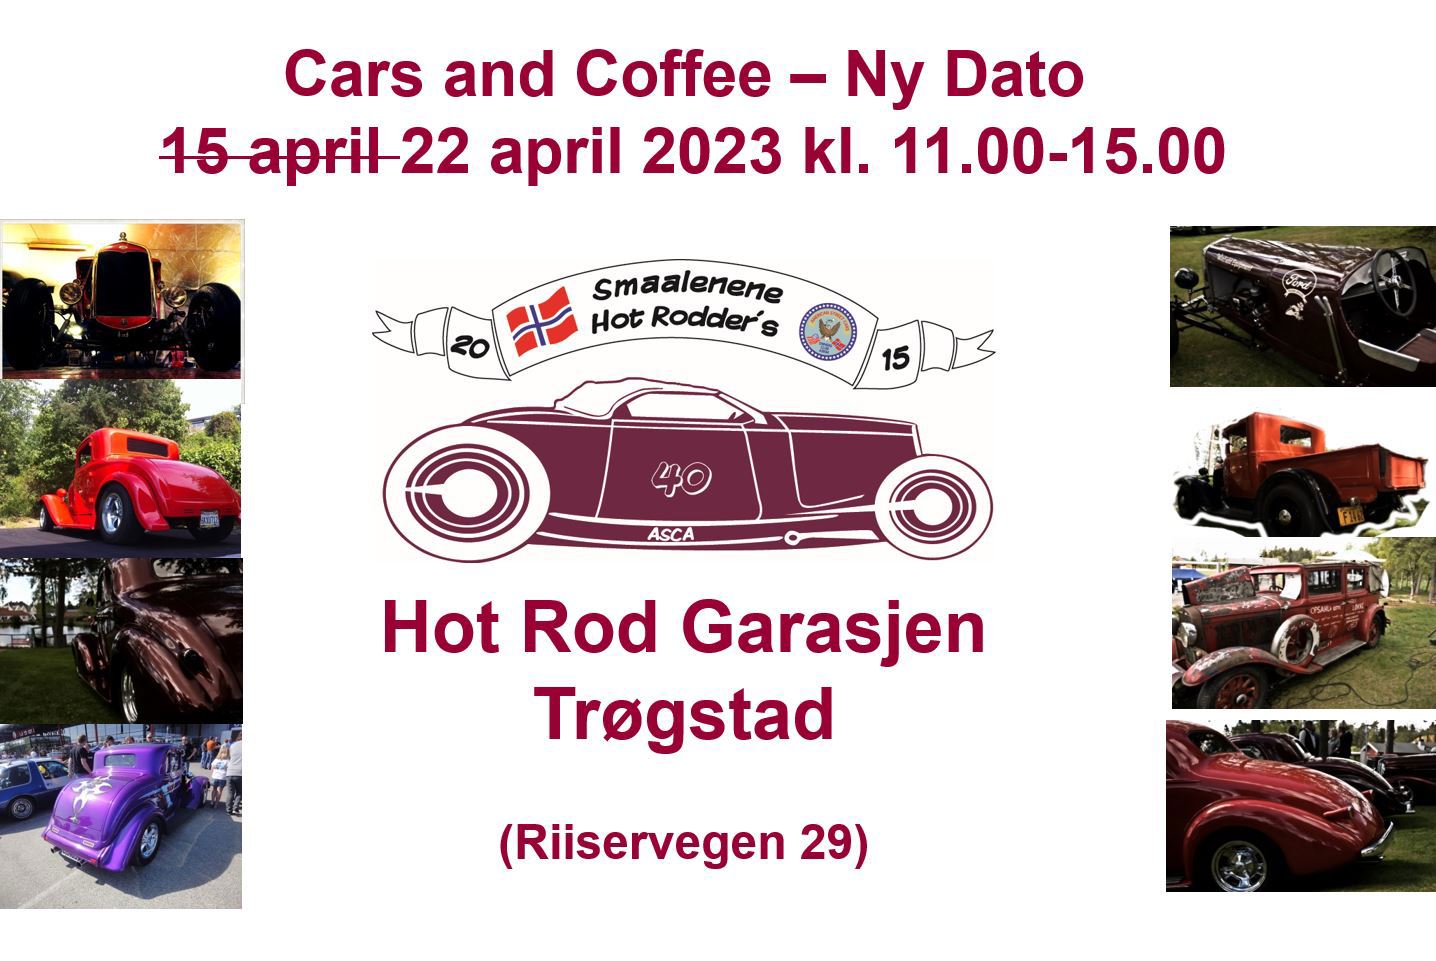 2023-04-22 Smaalenene Hot Rodder's Cars and Coffe.